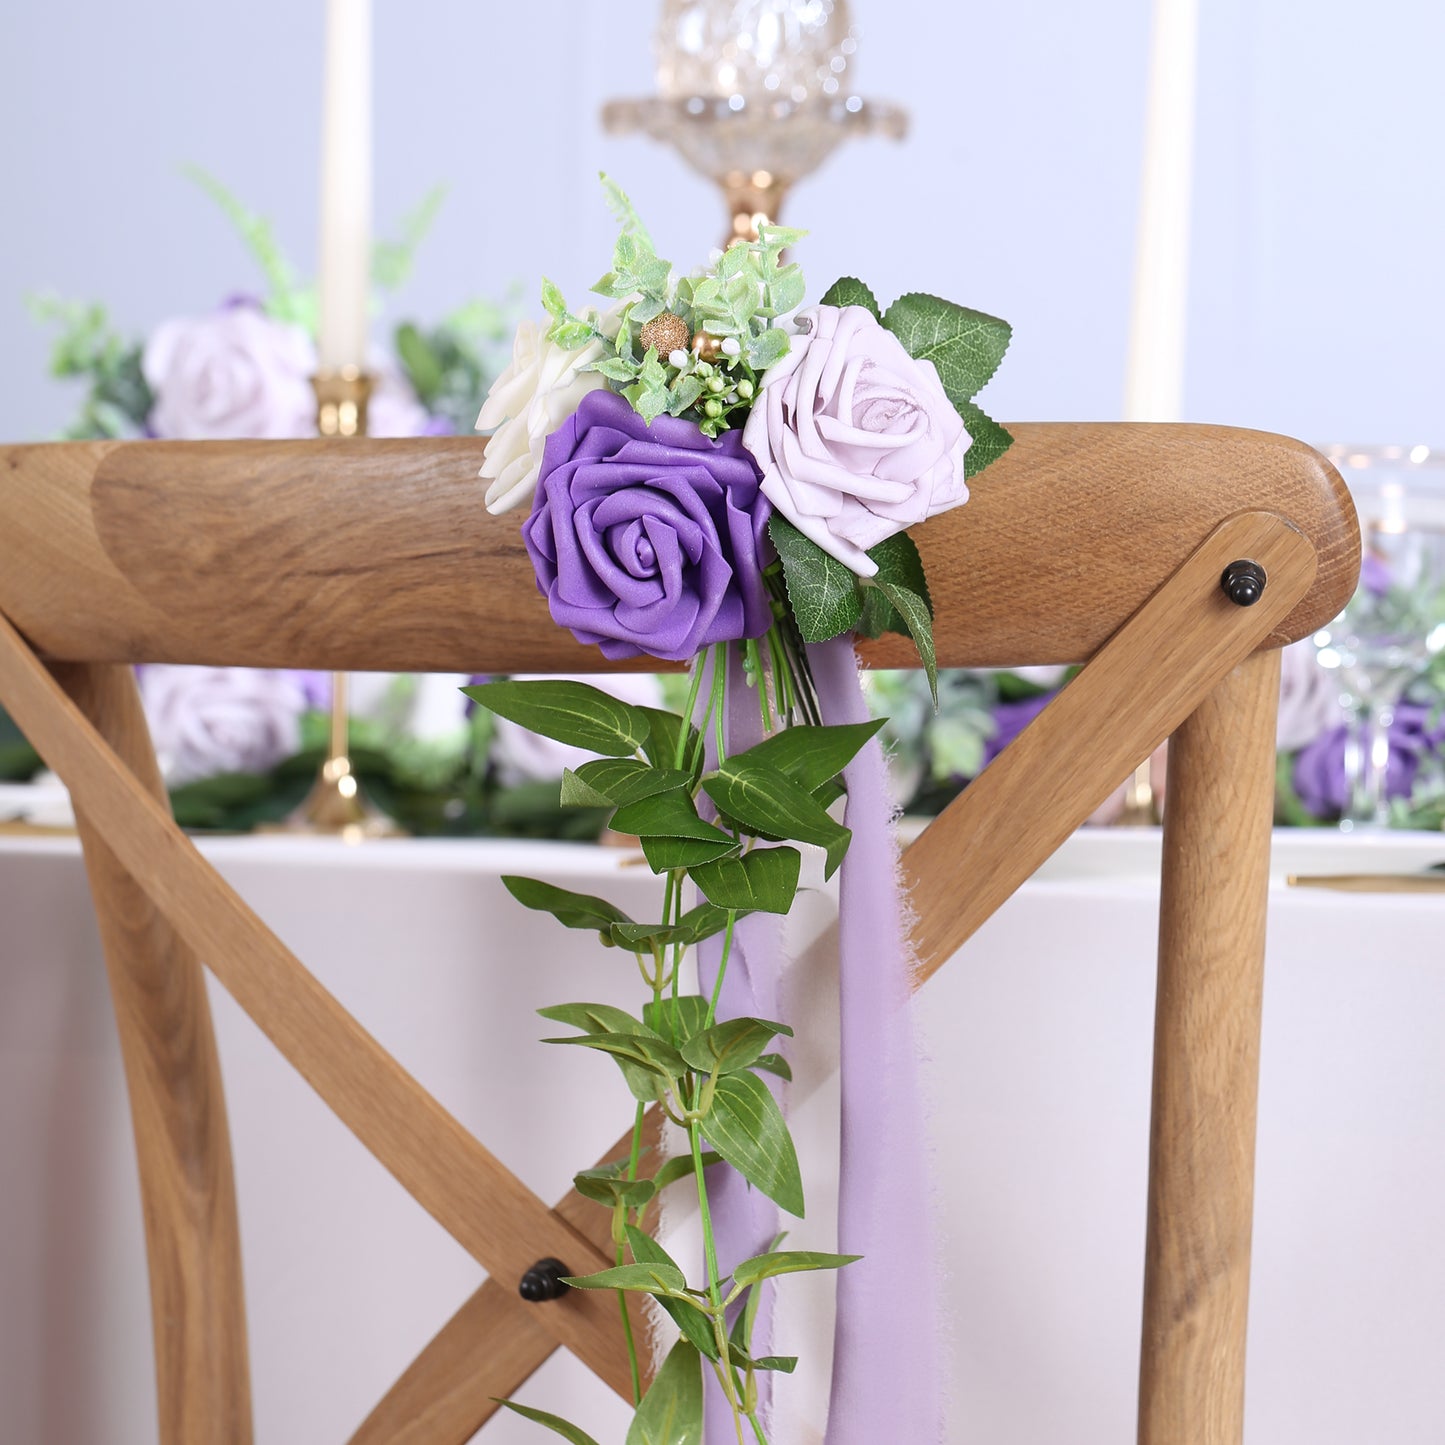 Wedding Aisle Decorations Purple Pew Flowers Set of 10 for Wedding Ceremony Party Chair Decor with Artificial Flowers Eucalyptus and Ribbons